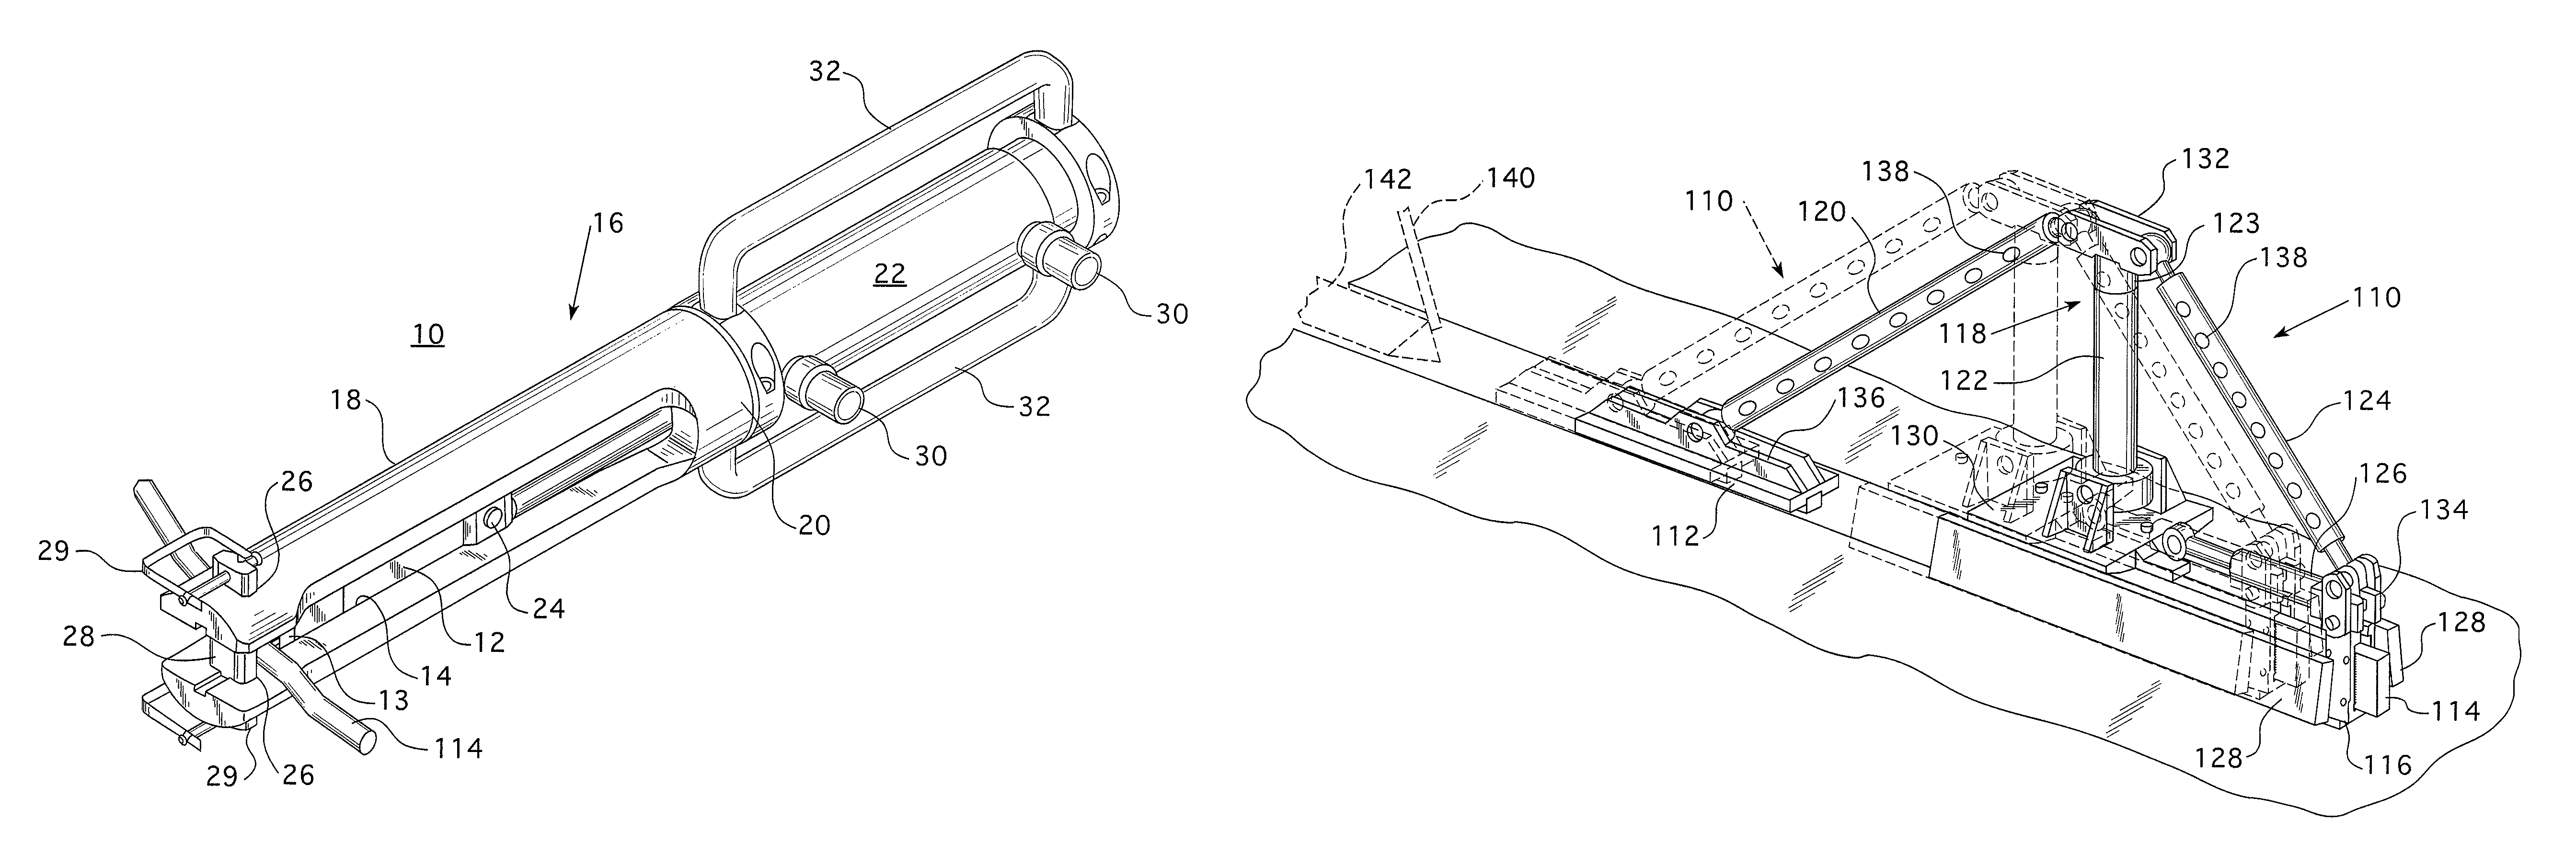 Method for removing a half turn of a coil from a slot of a dynamoelectric machine